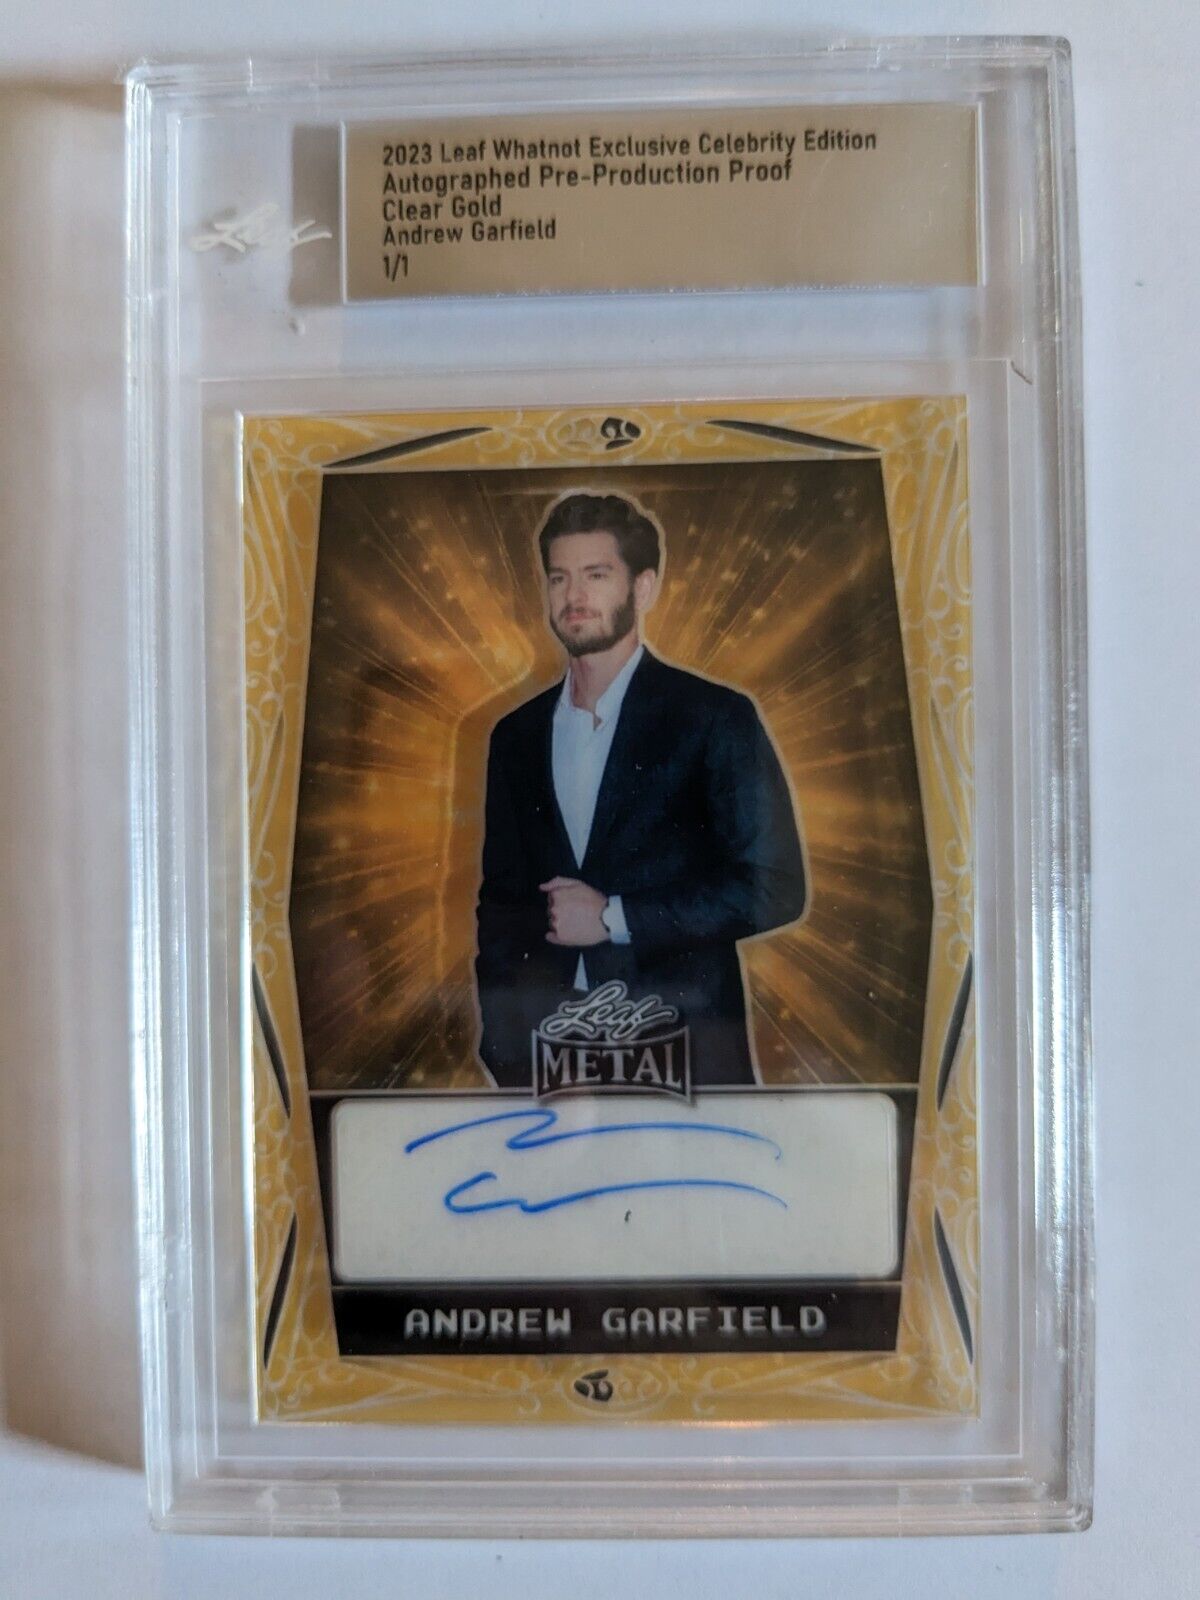 ANDREW GARFIELD Auto 2023 Leaf Whatnot Celebrity PROOF Spiderman Clear GOLD 1/1